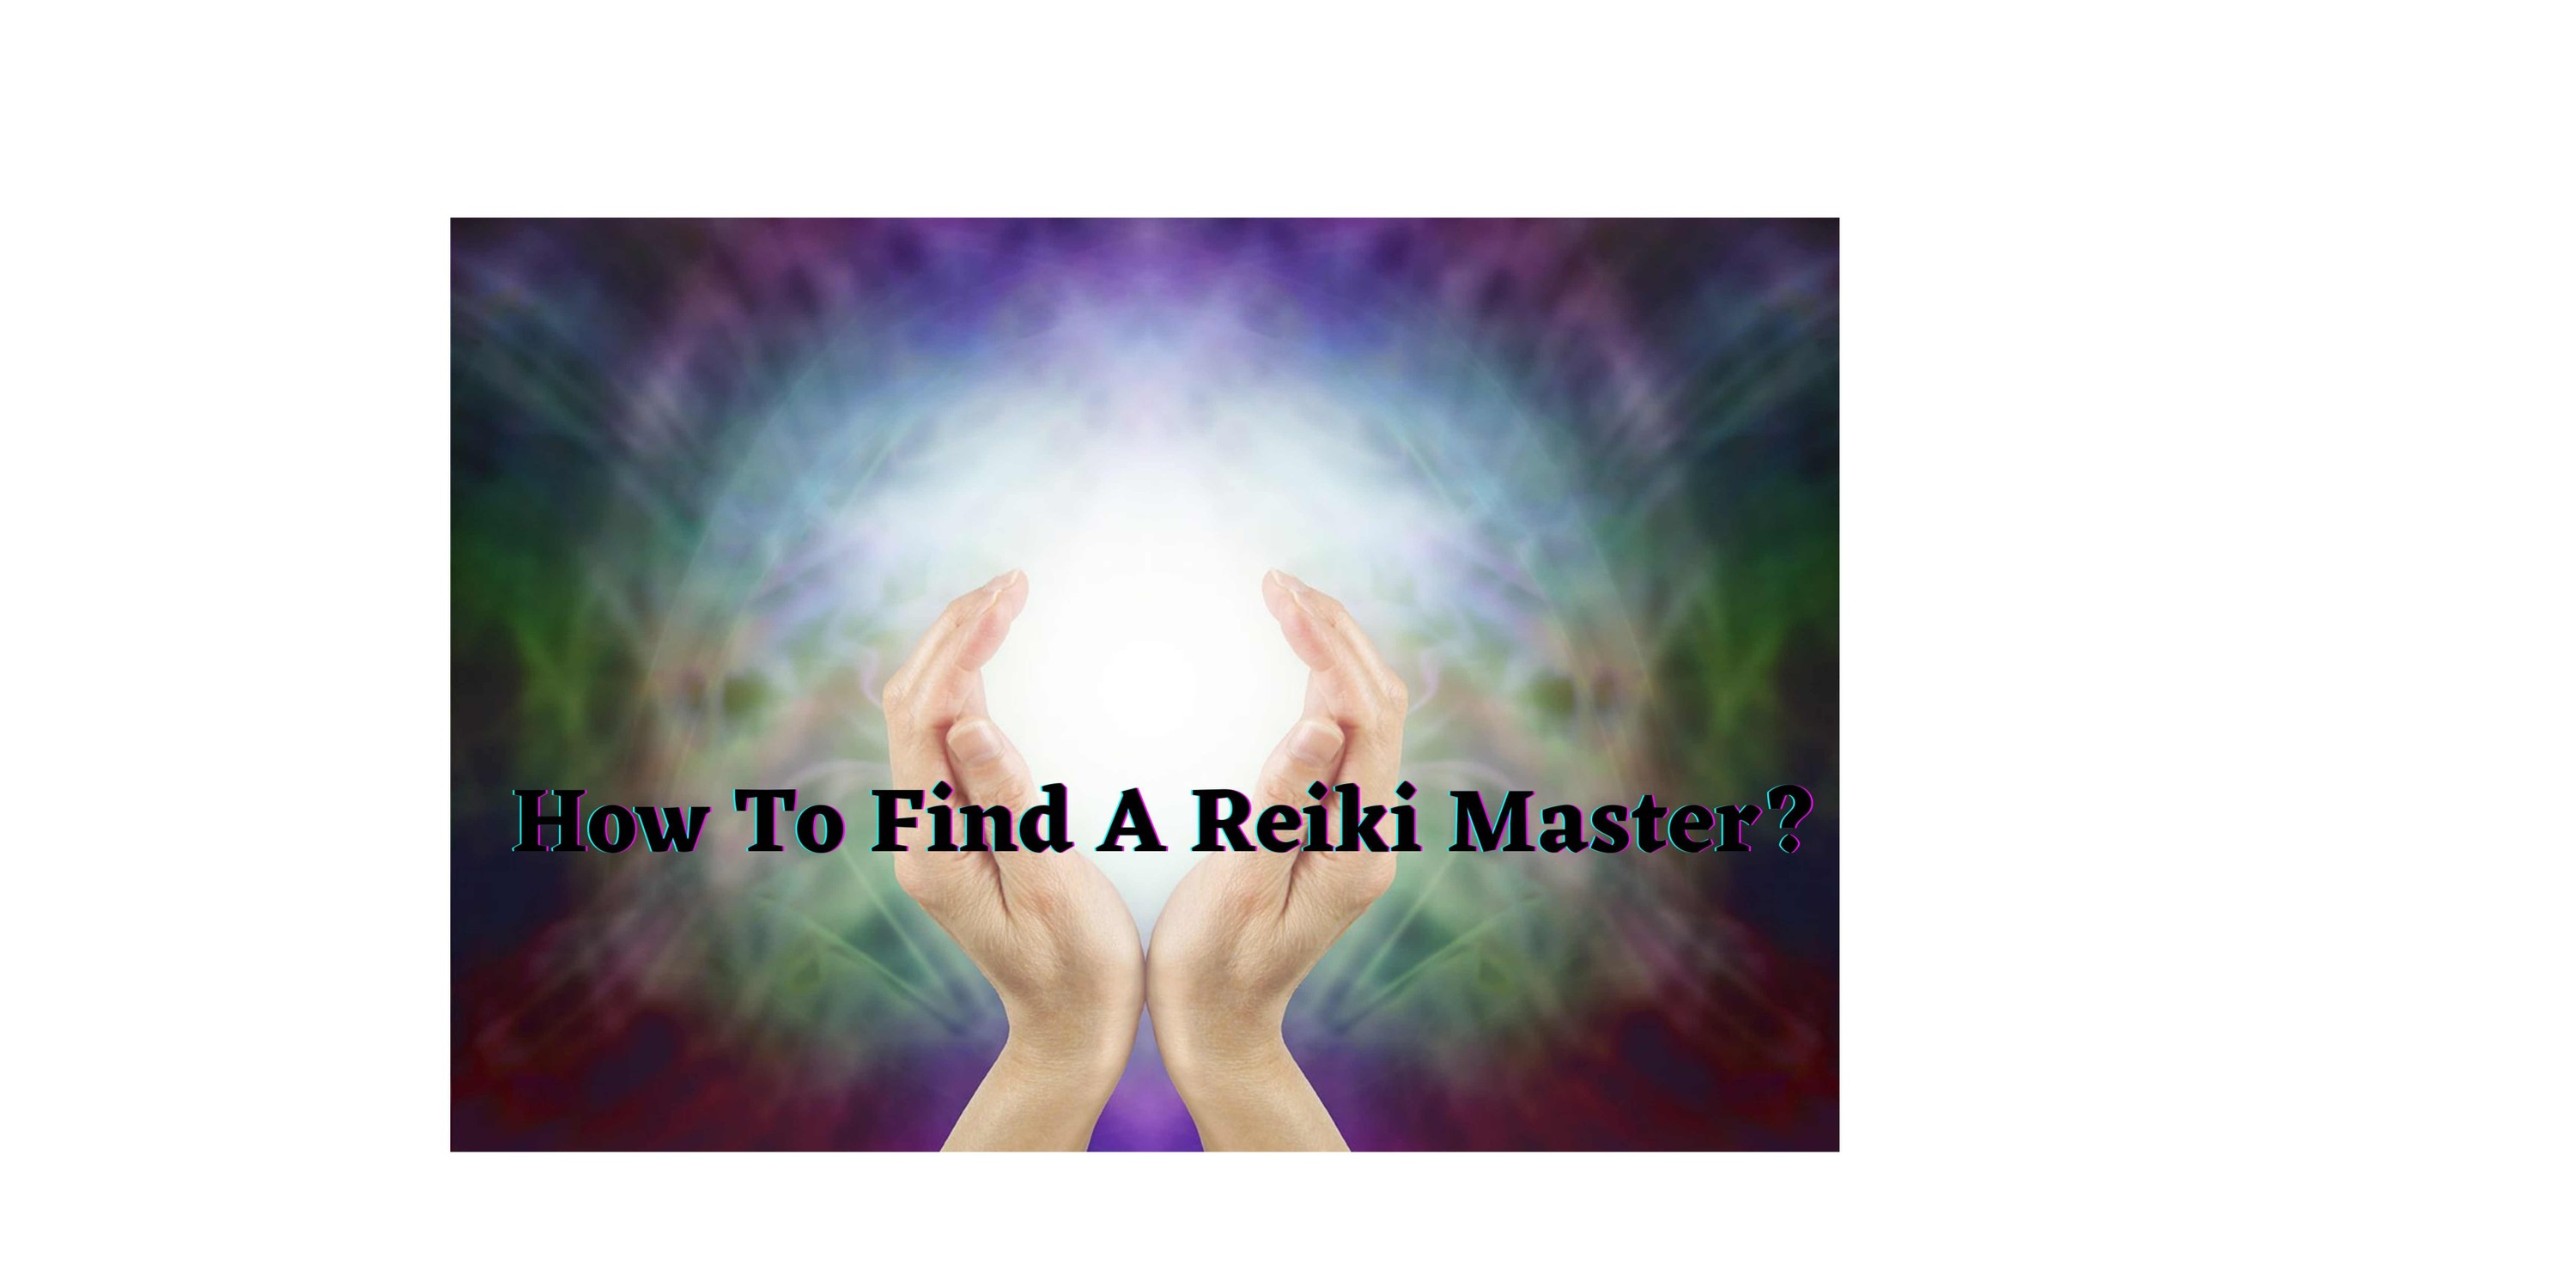 How To Find A Reiki Master?